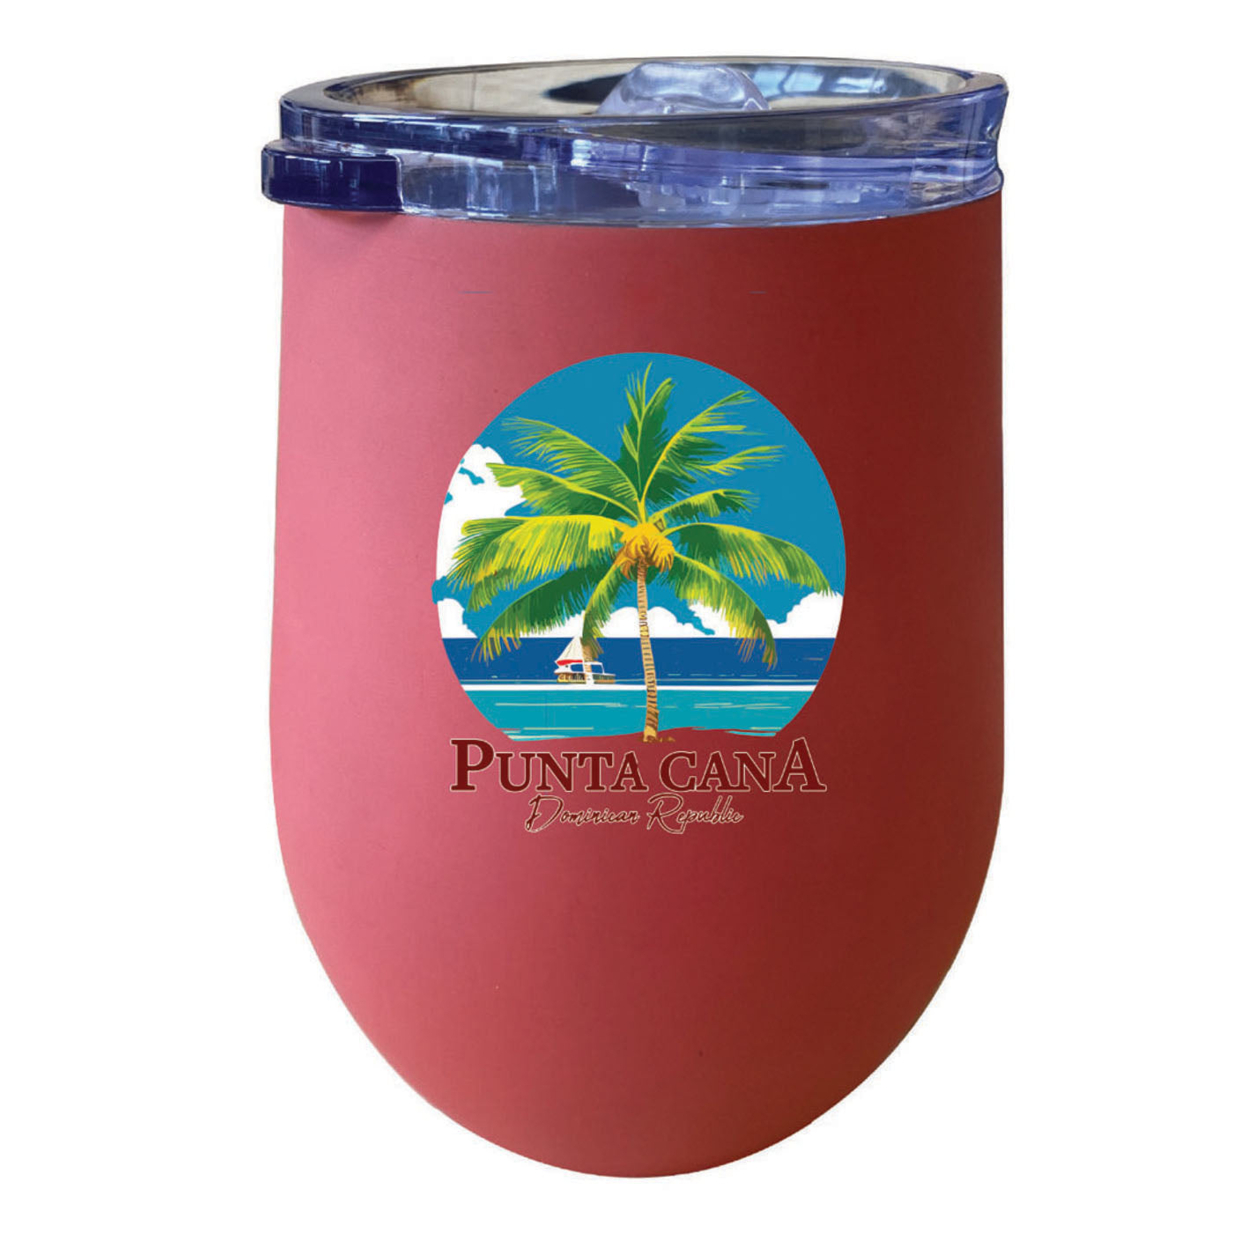 Punta Cana Dominican Republic Souvenir 12 Oz Insulated Wine Stainless Steel Tumbler - Coral, PALM